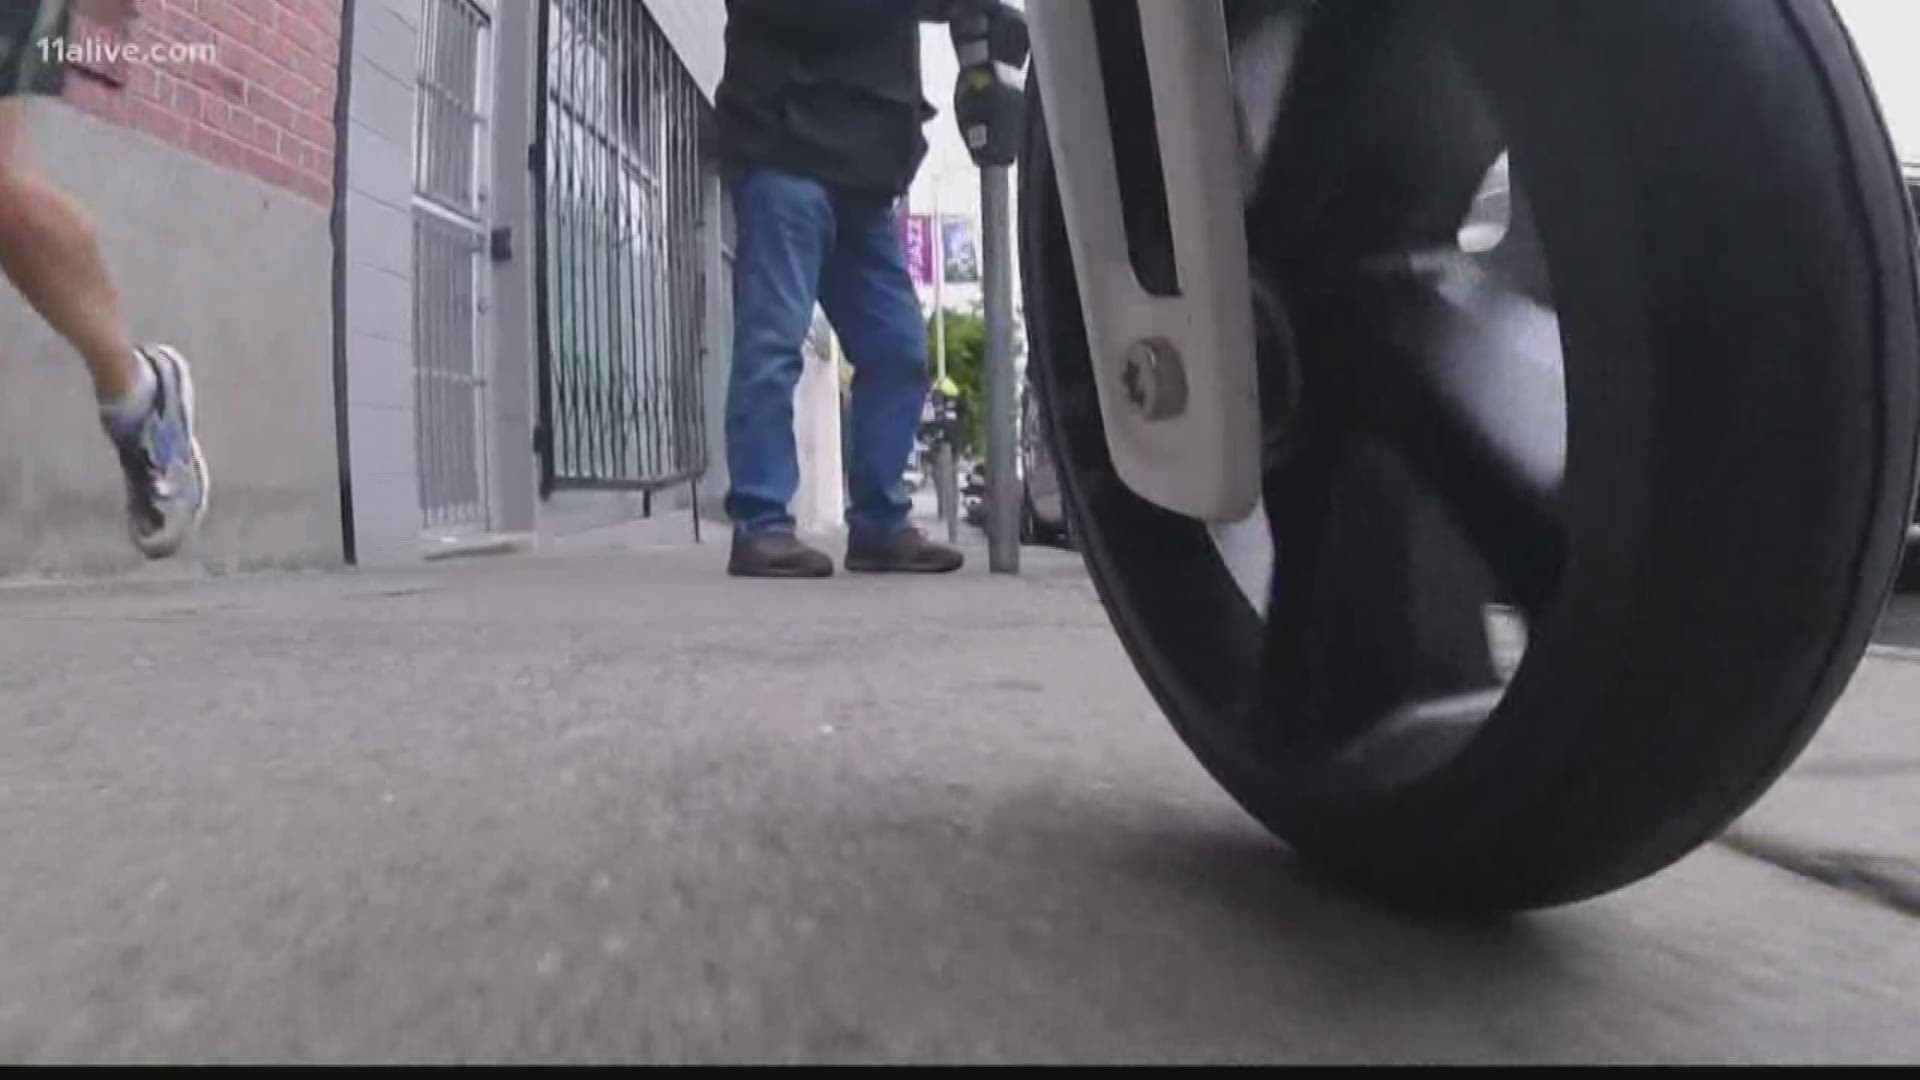 After Atlanta's mayor imposed a nighttime ban on e-scooters and other dockless mobility devices, the company says they are pulling them out of the Atlanta market.